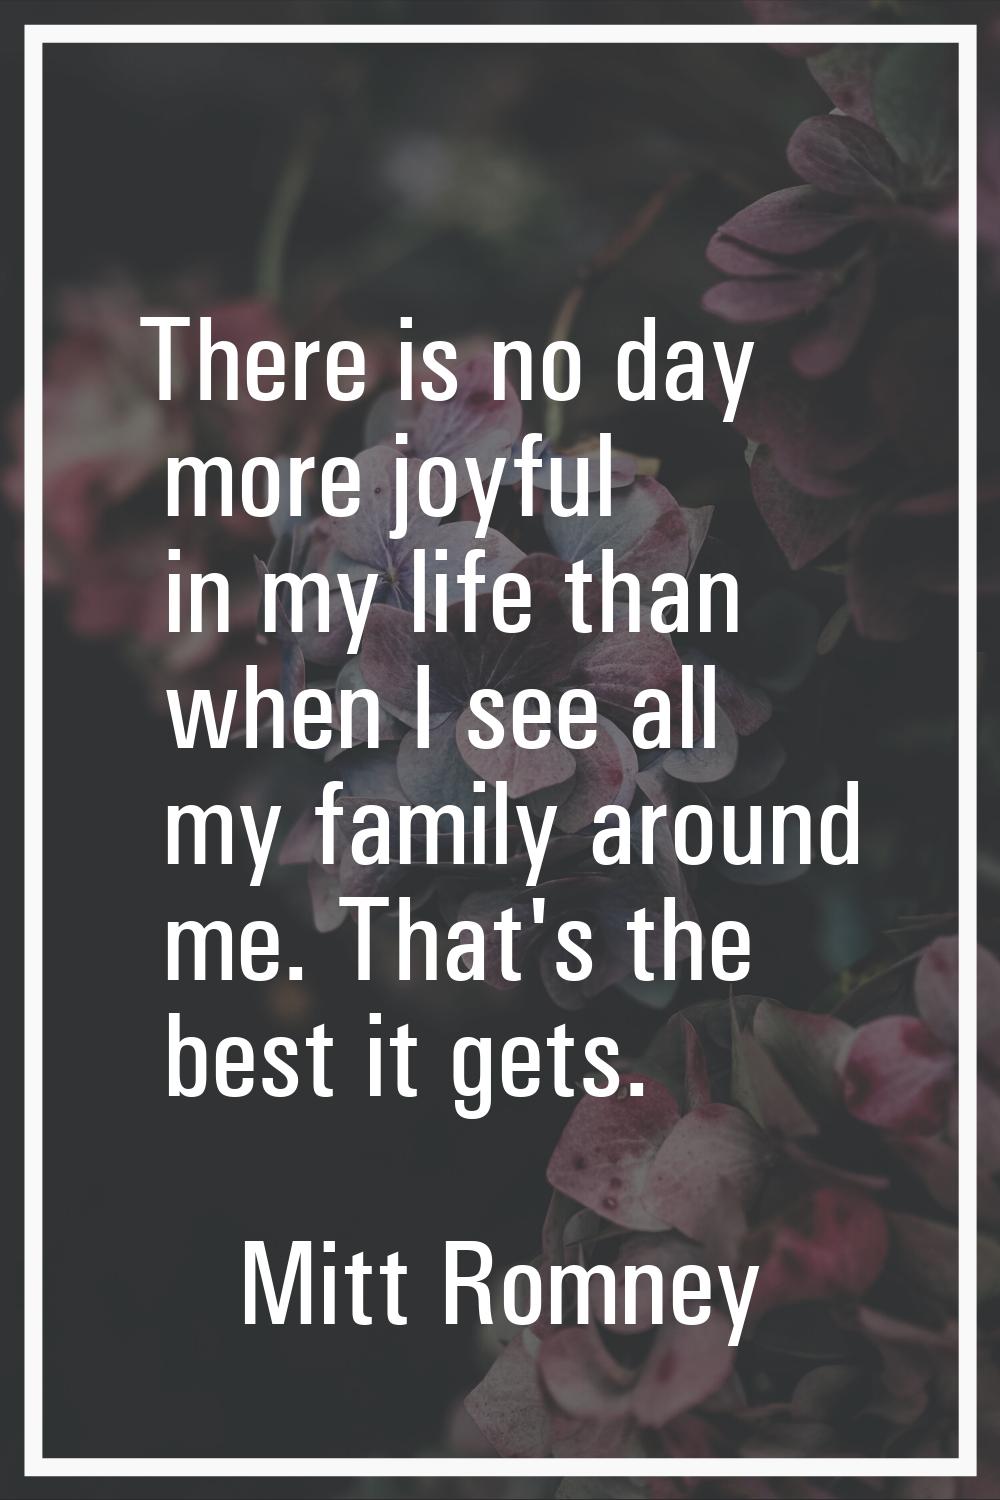 There is no day more joyful in my life than when I see all my family around me. That's the best it 